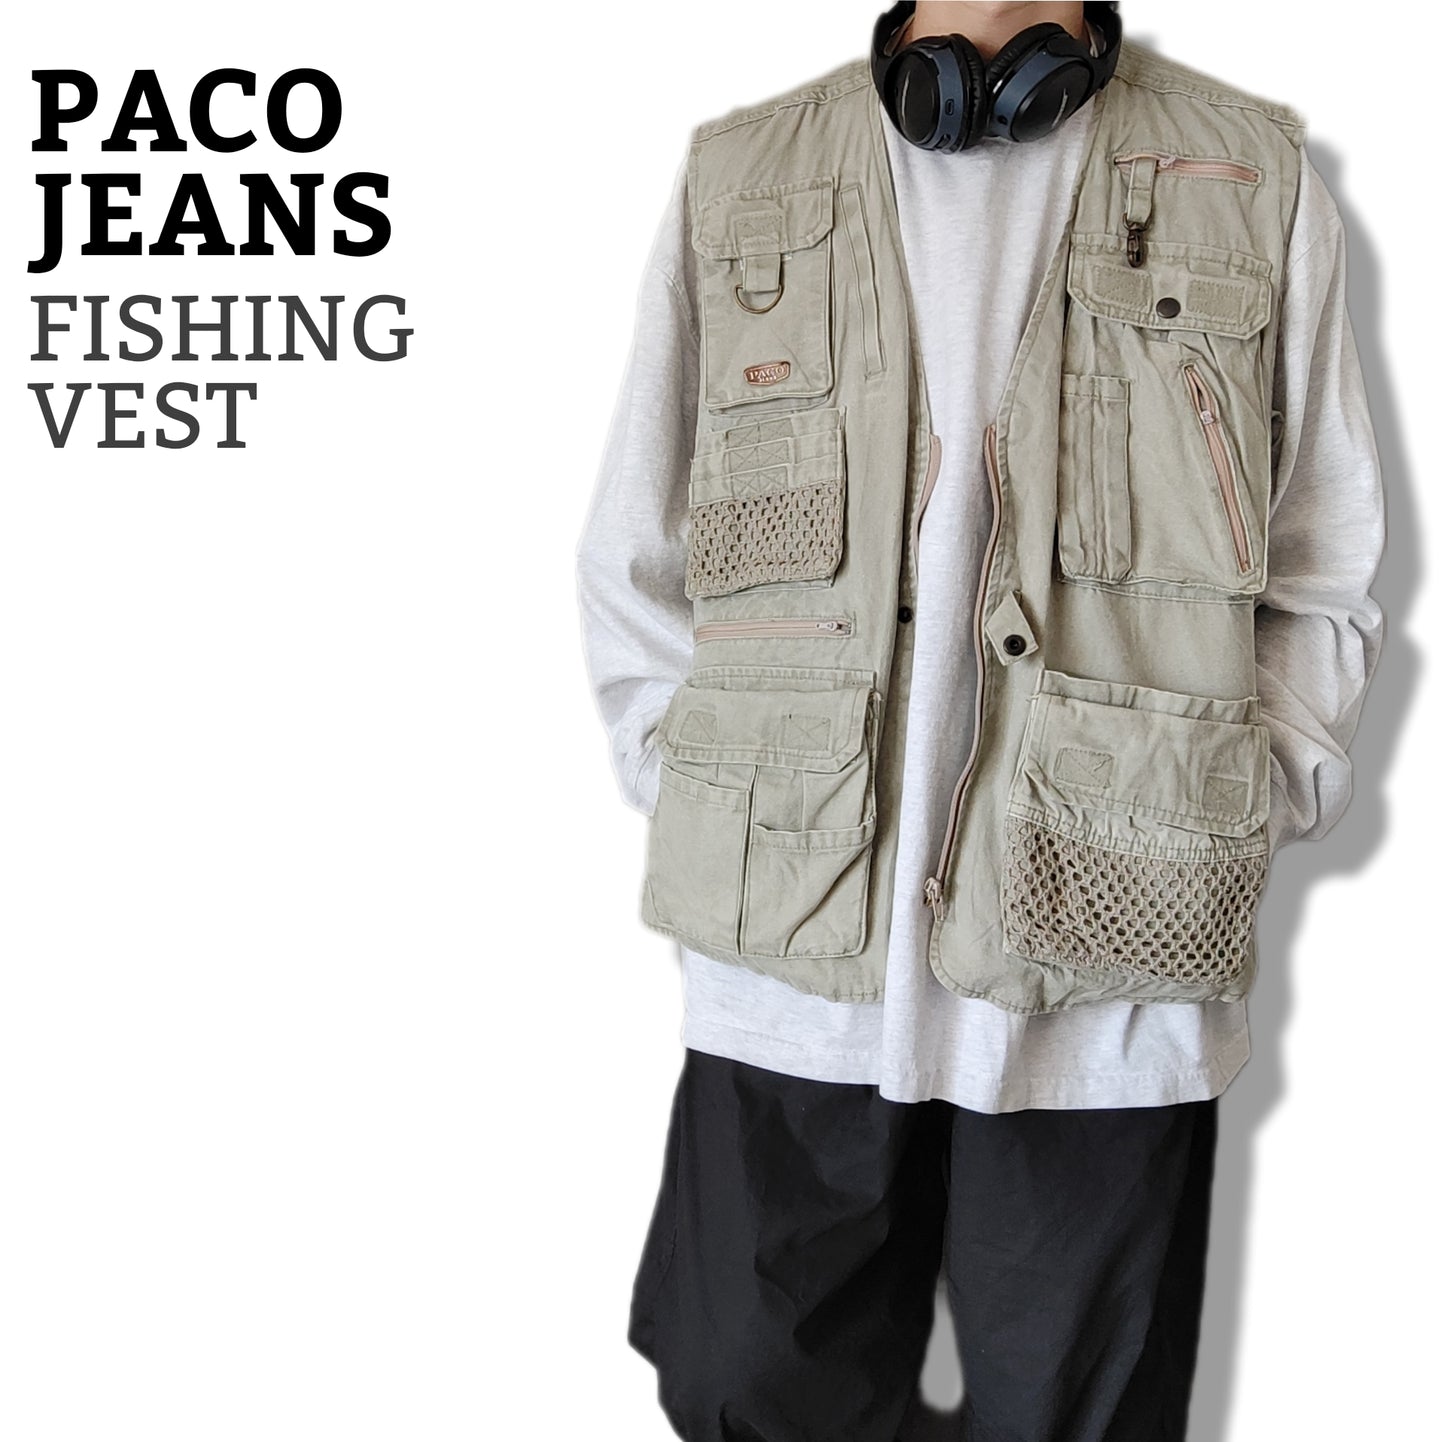 [PACO JEANS] fishing vest